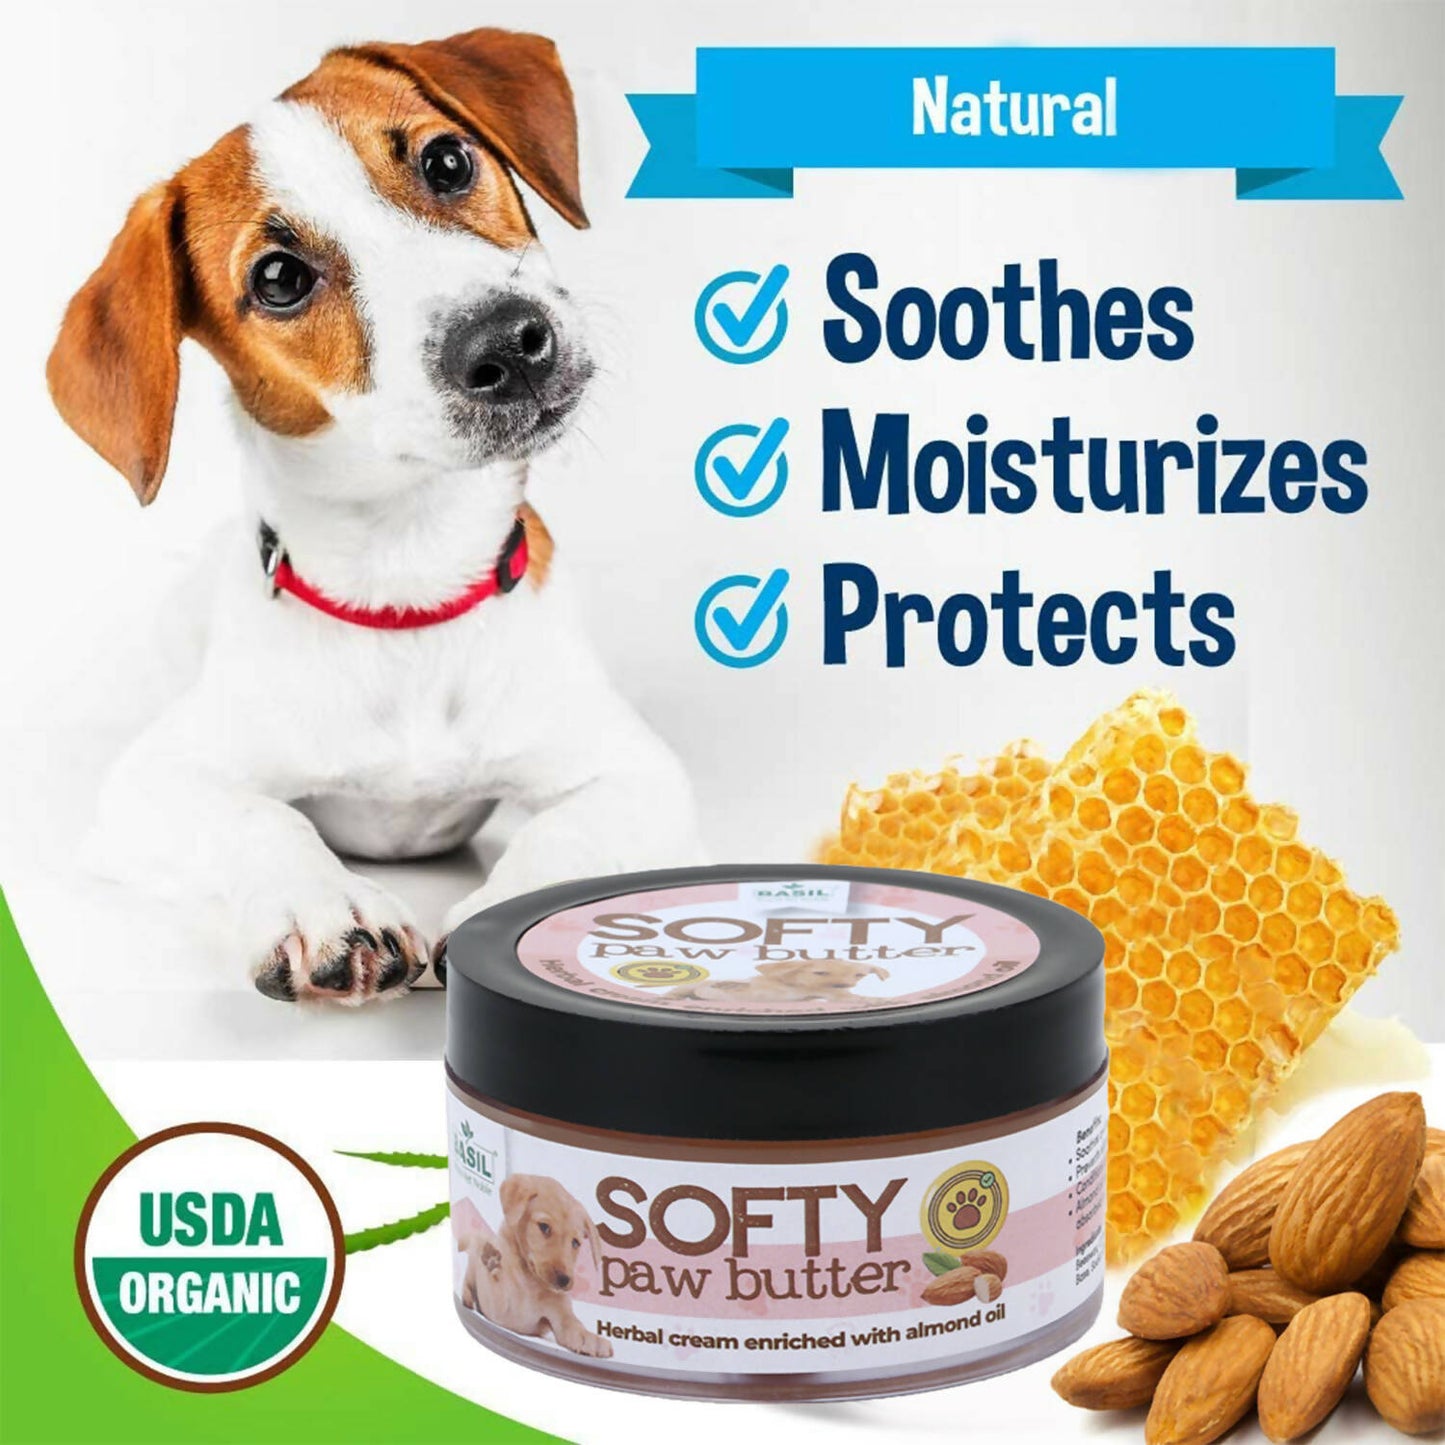 Basil - Softy Paw Butter For Dogs